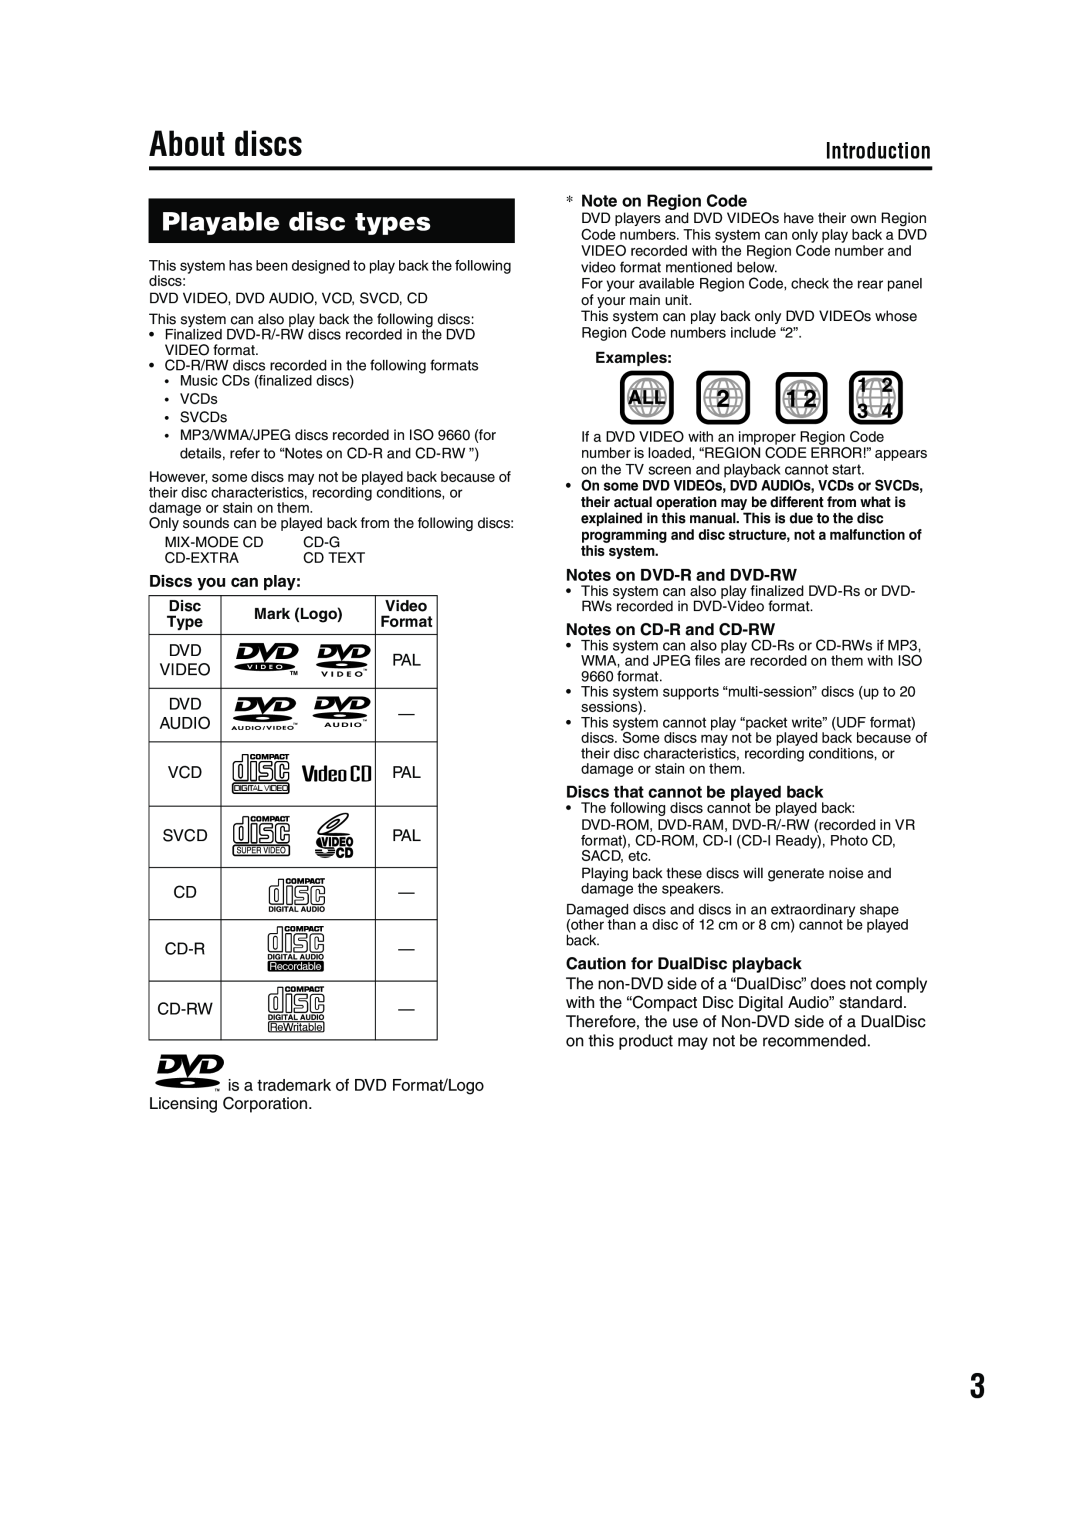 JVC GVT0143-008A About discs, Playable disc types, Discs you can play, Note on Region Code, Notes on DVD-R and DVD-RW 